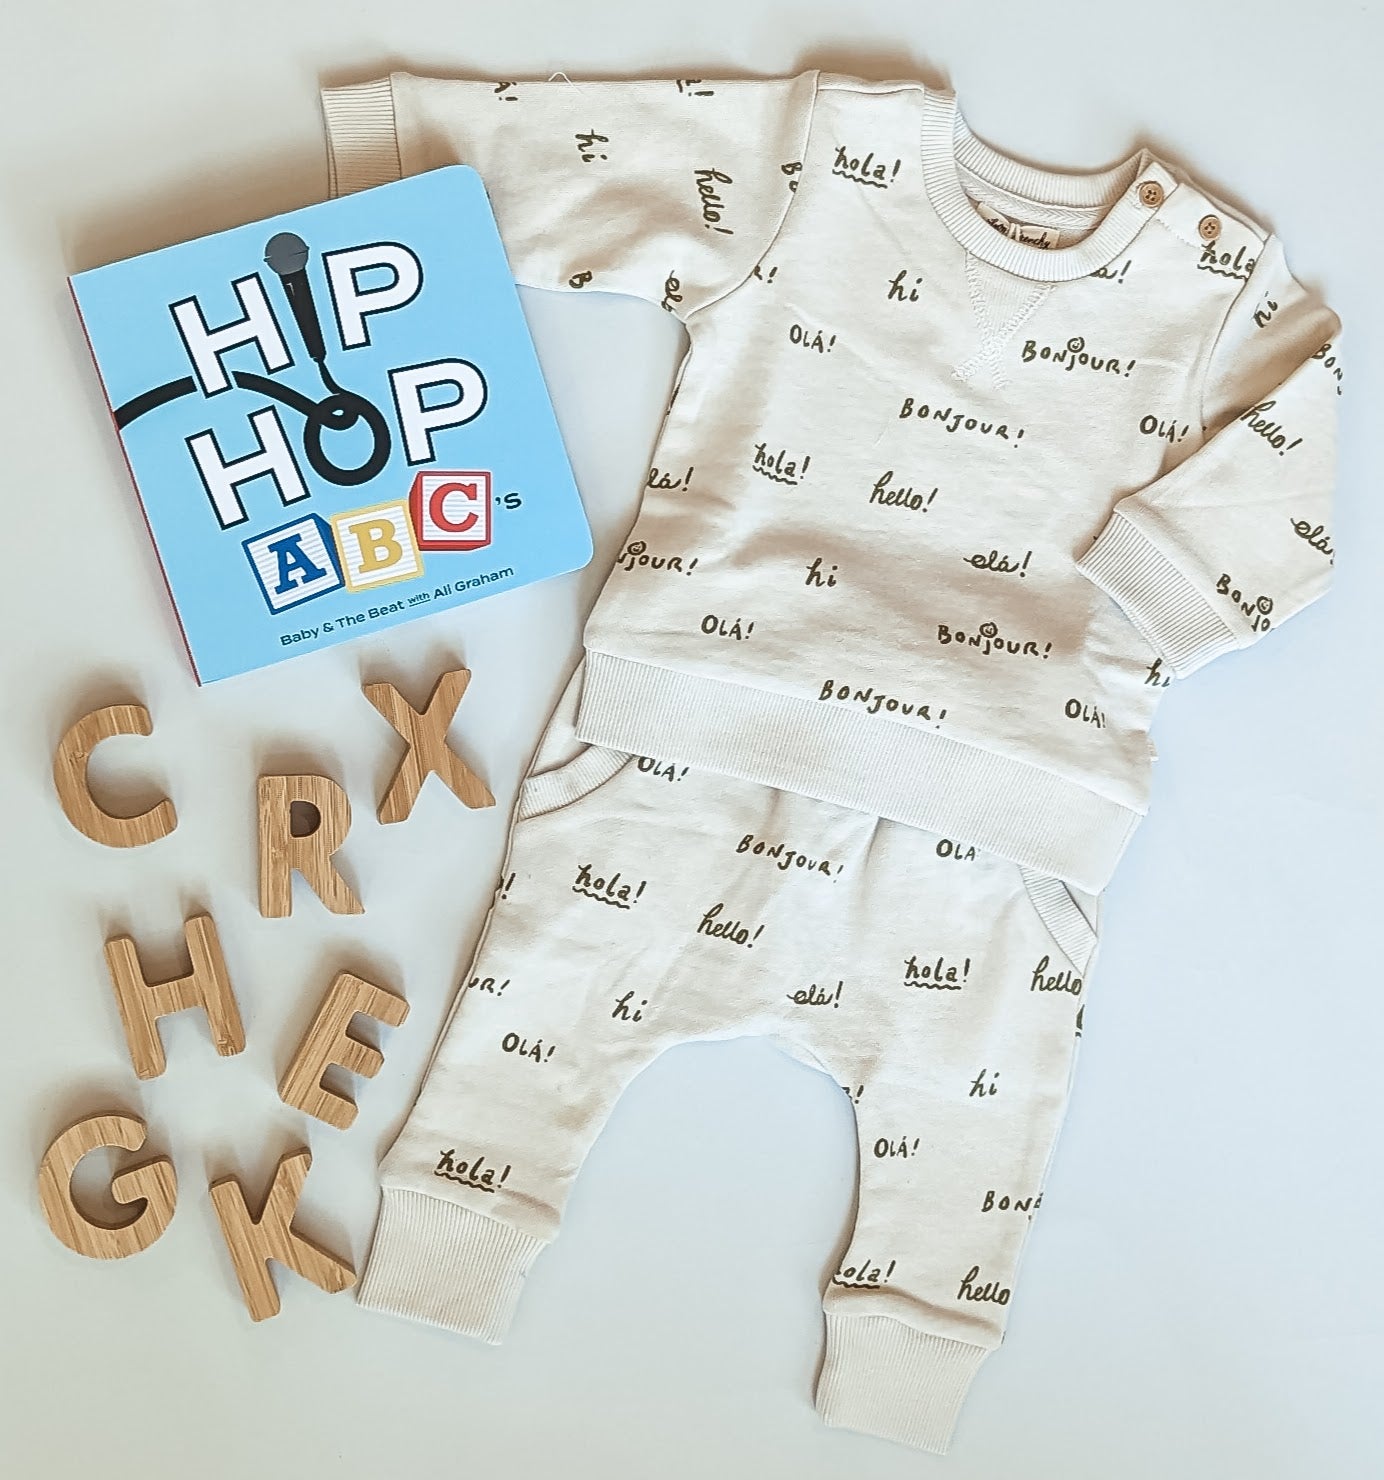 Unique baby shower gifts with an alphabet theme